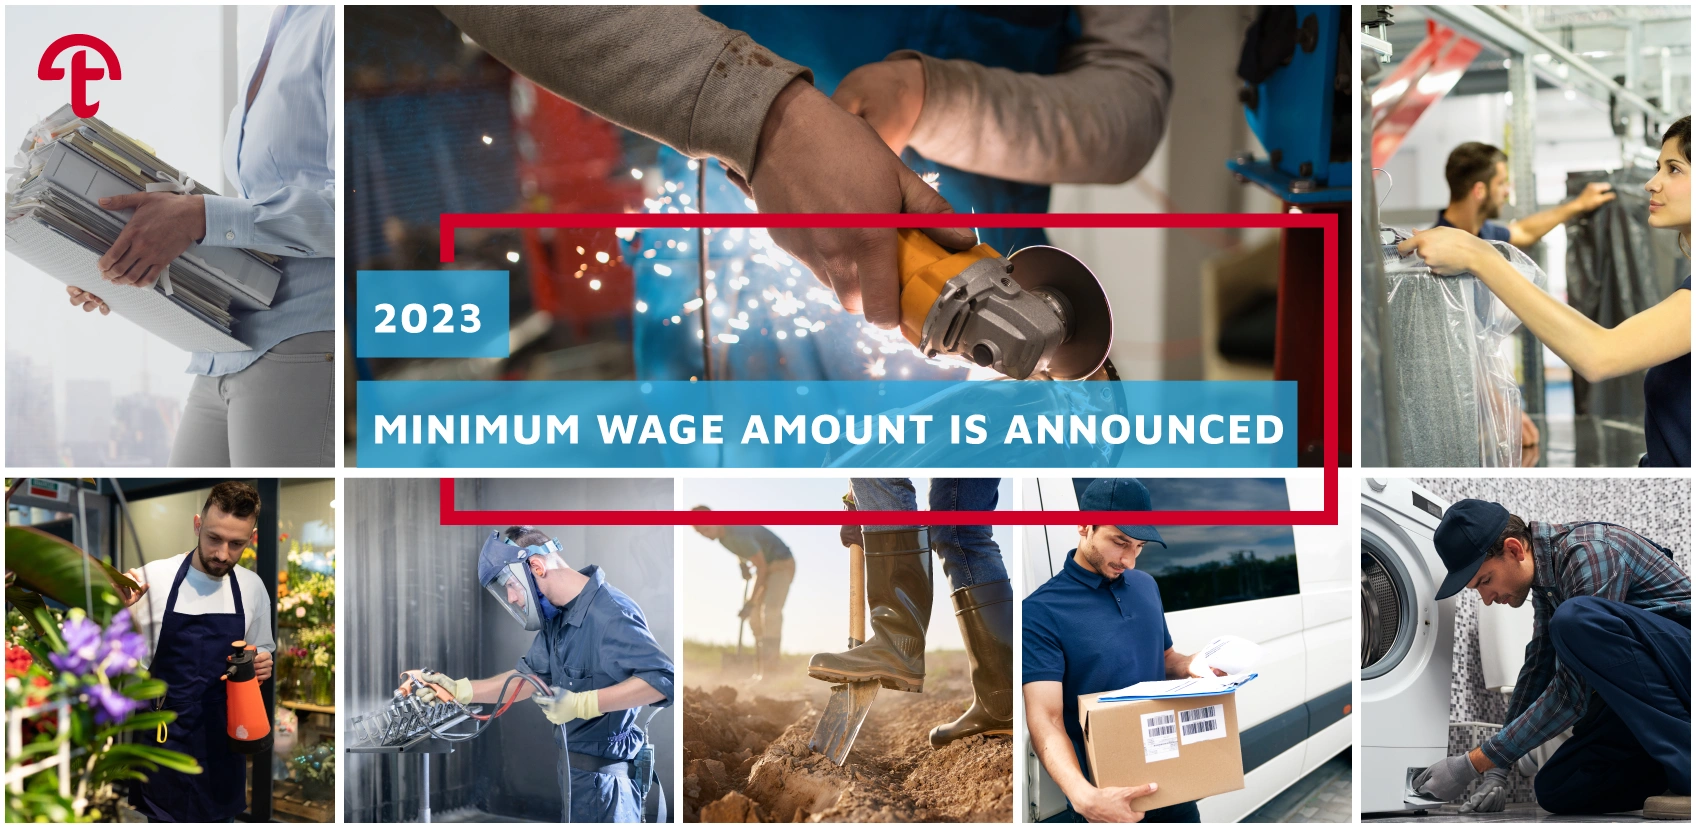 2023 Minimum Wage Amount is Announced